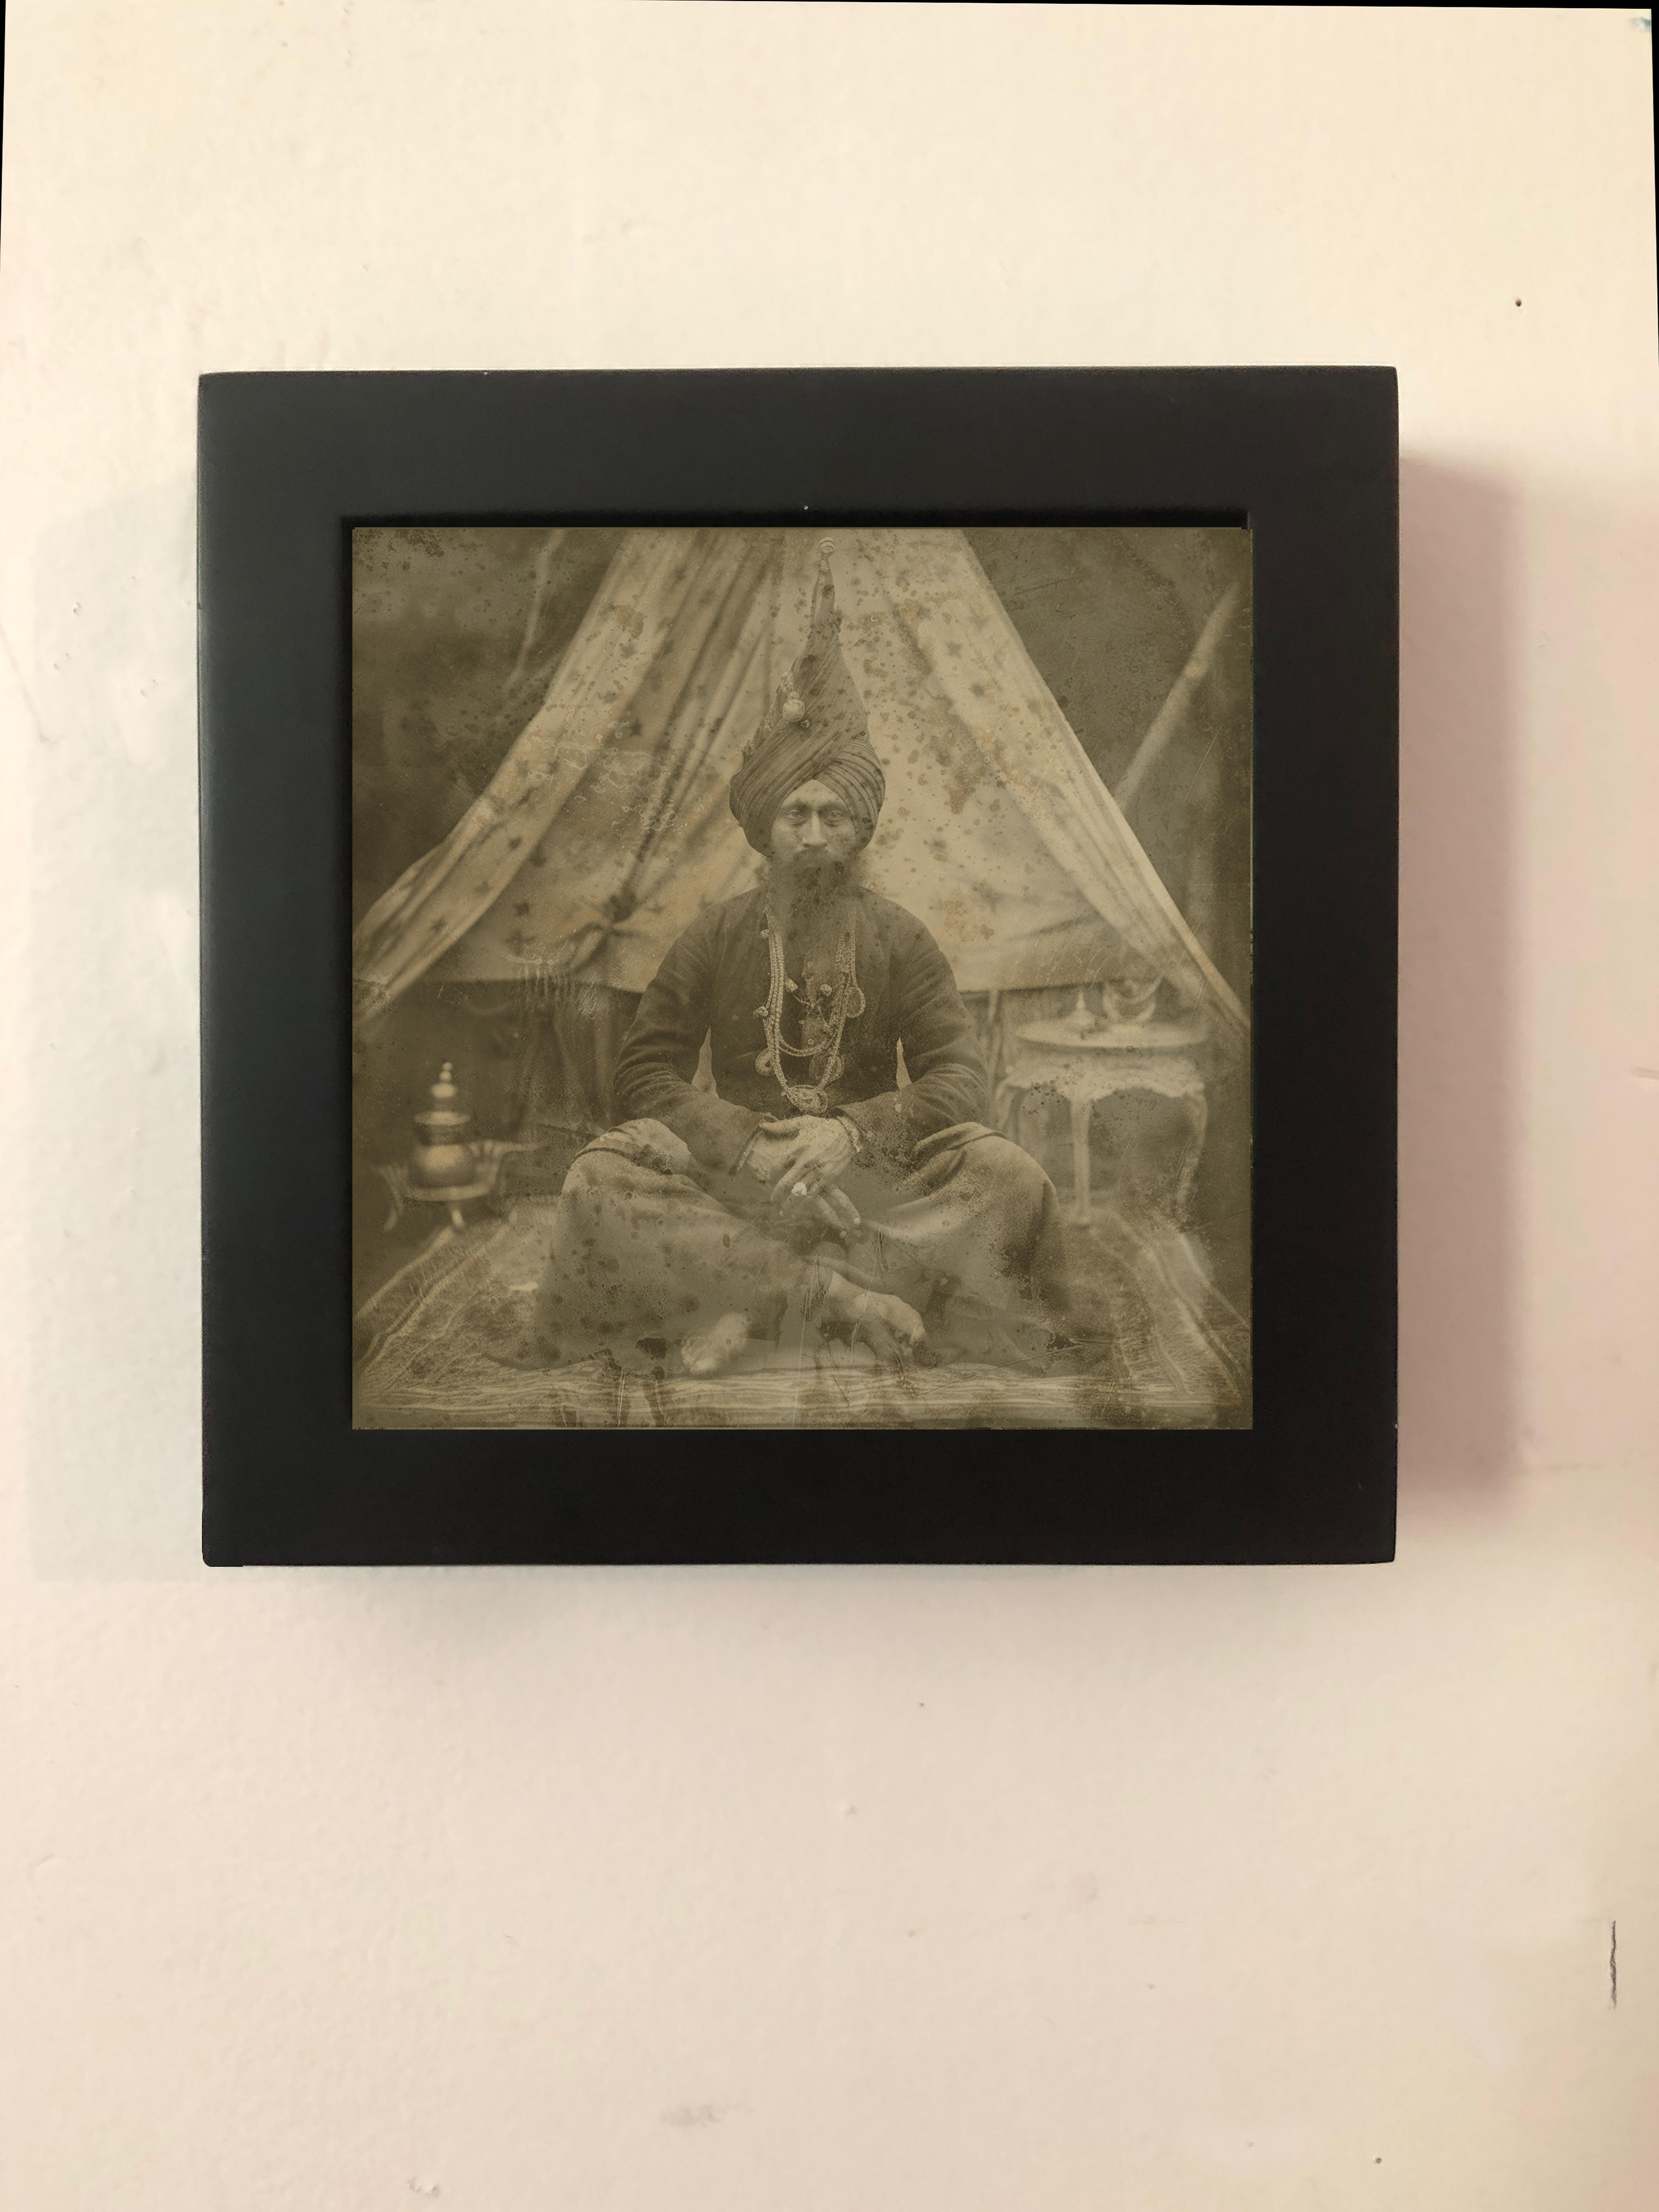 FPA Francis Pavy Artist Figurative Photograph - Indian Yogi Contortionist - exotic daguerreotype reproduction Framed